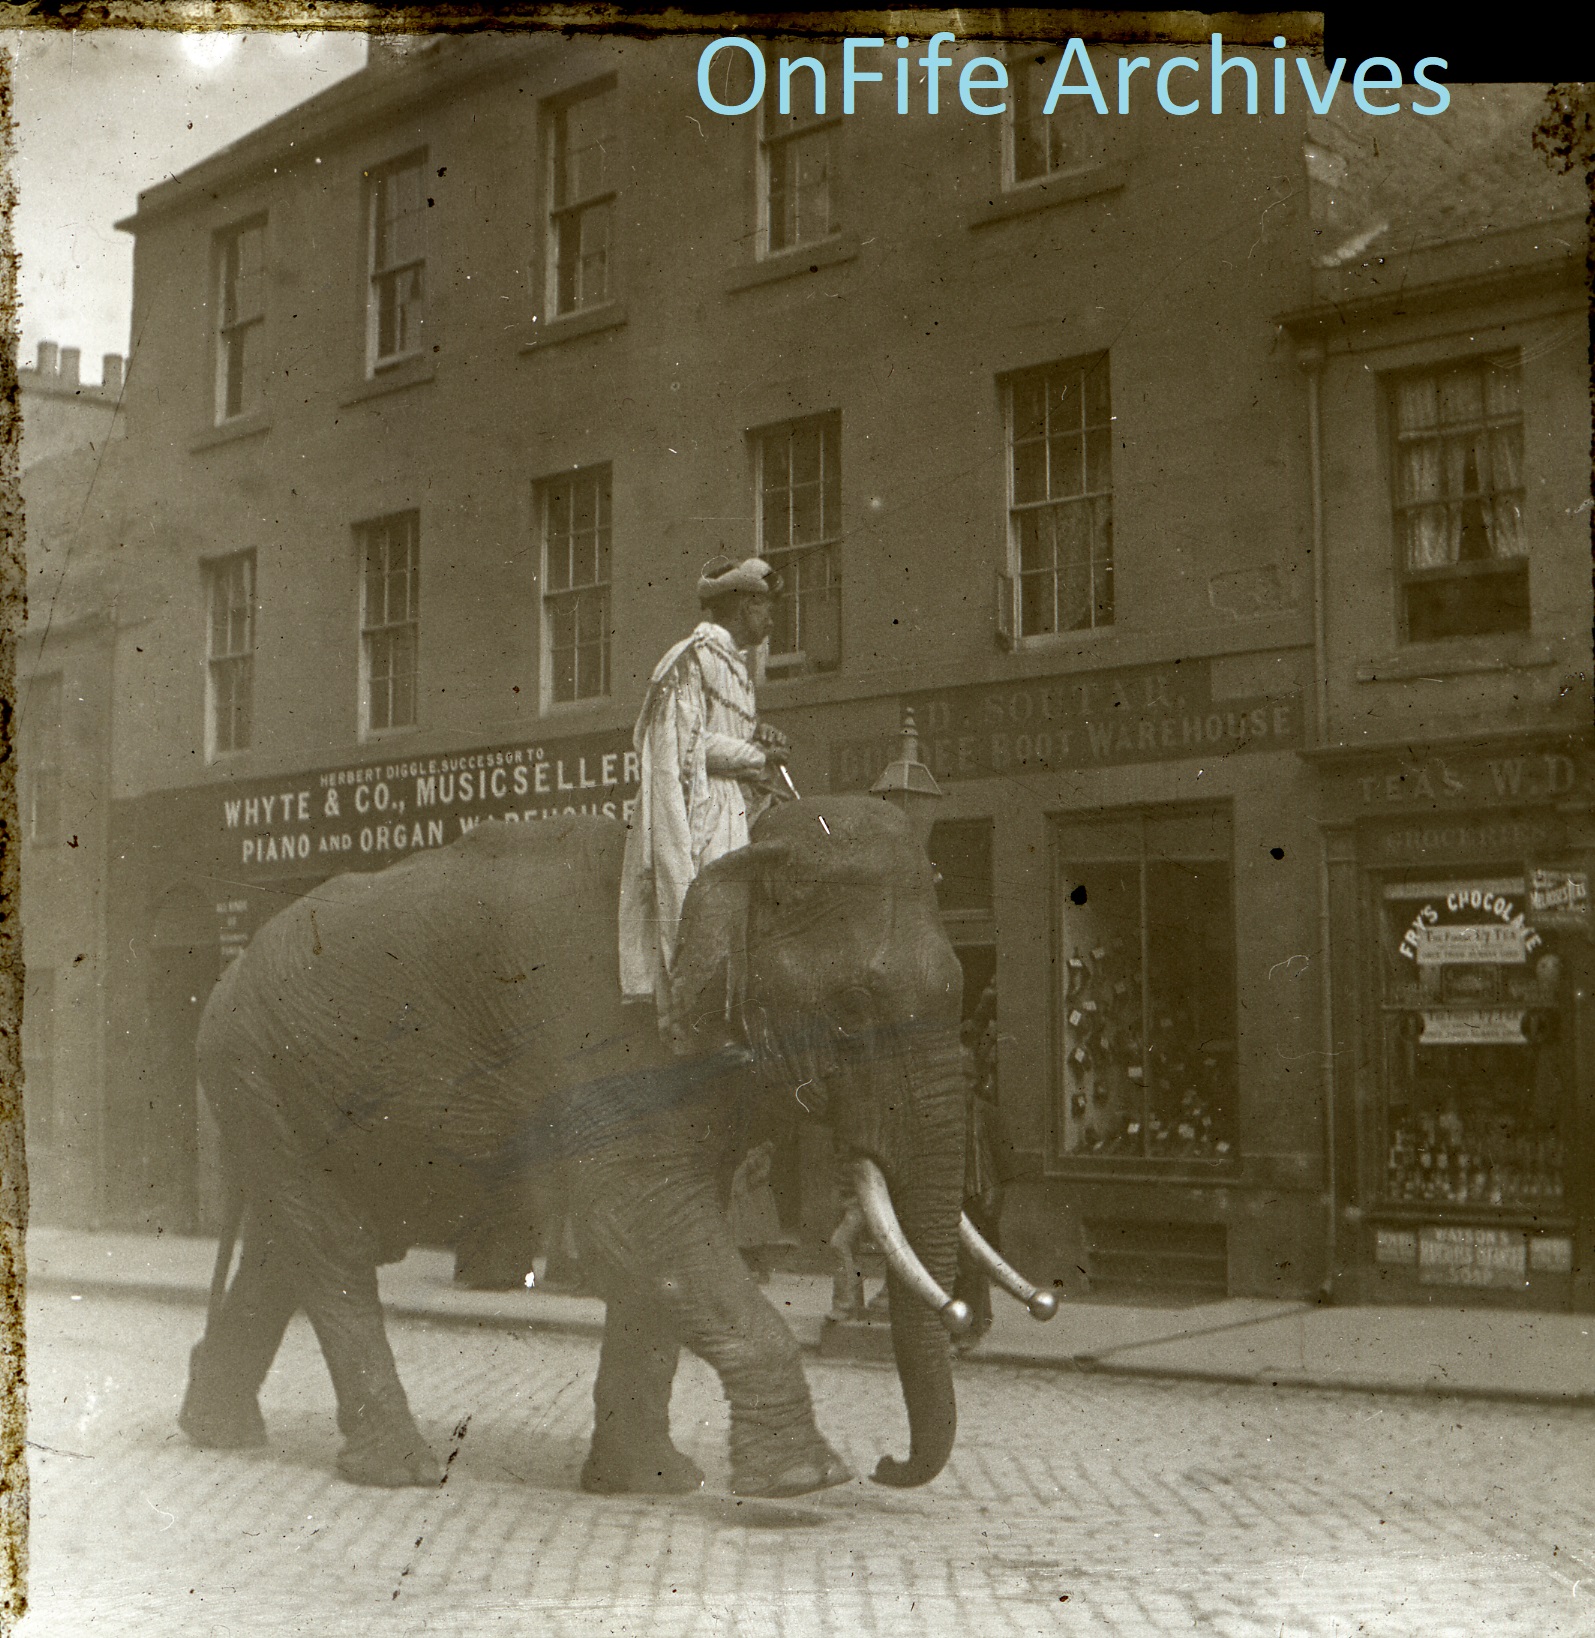 Photograph of a circus elephant in Fife by George Normand.